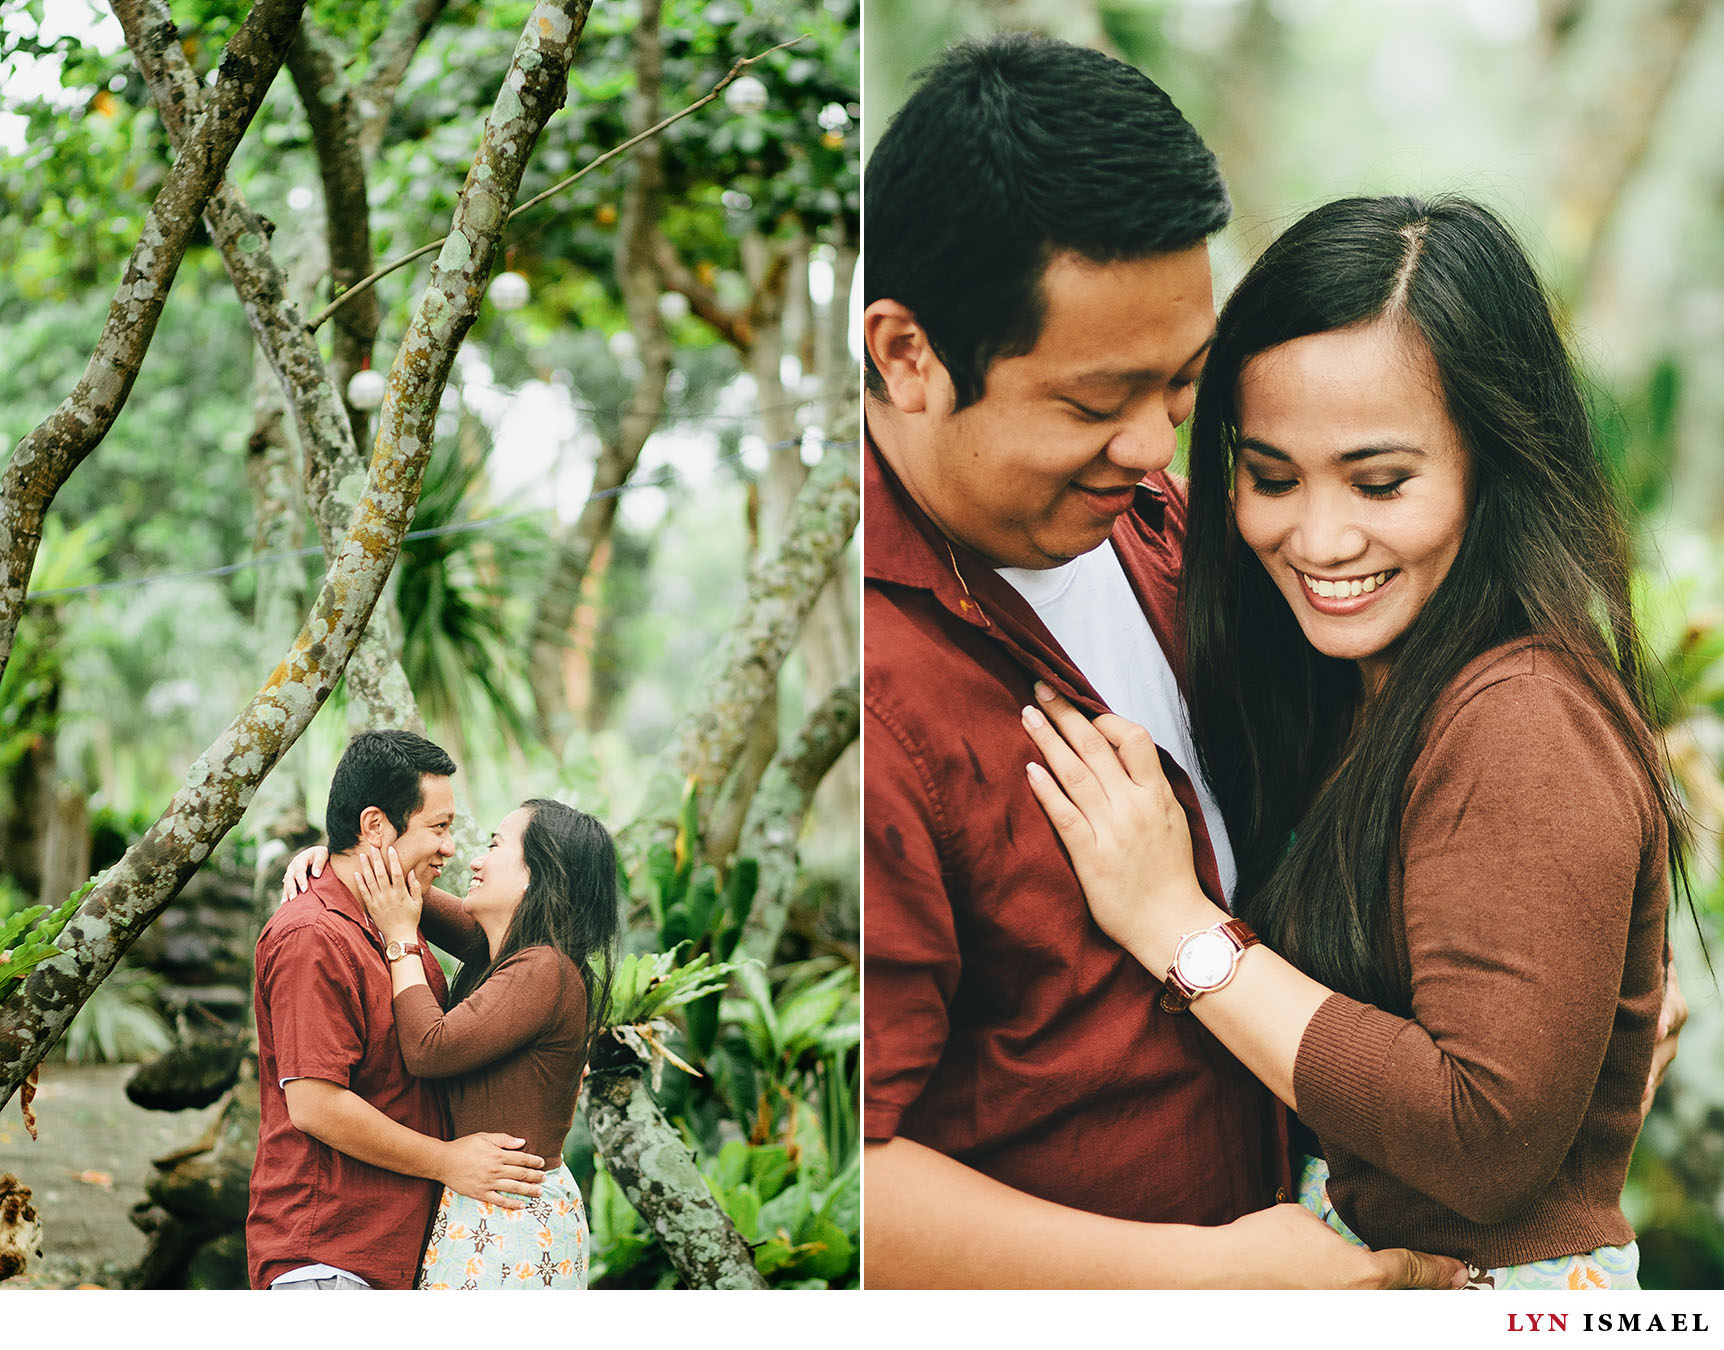 An engagement session by International wedding photographer in Pagudpud, Ilocos Norte.